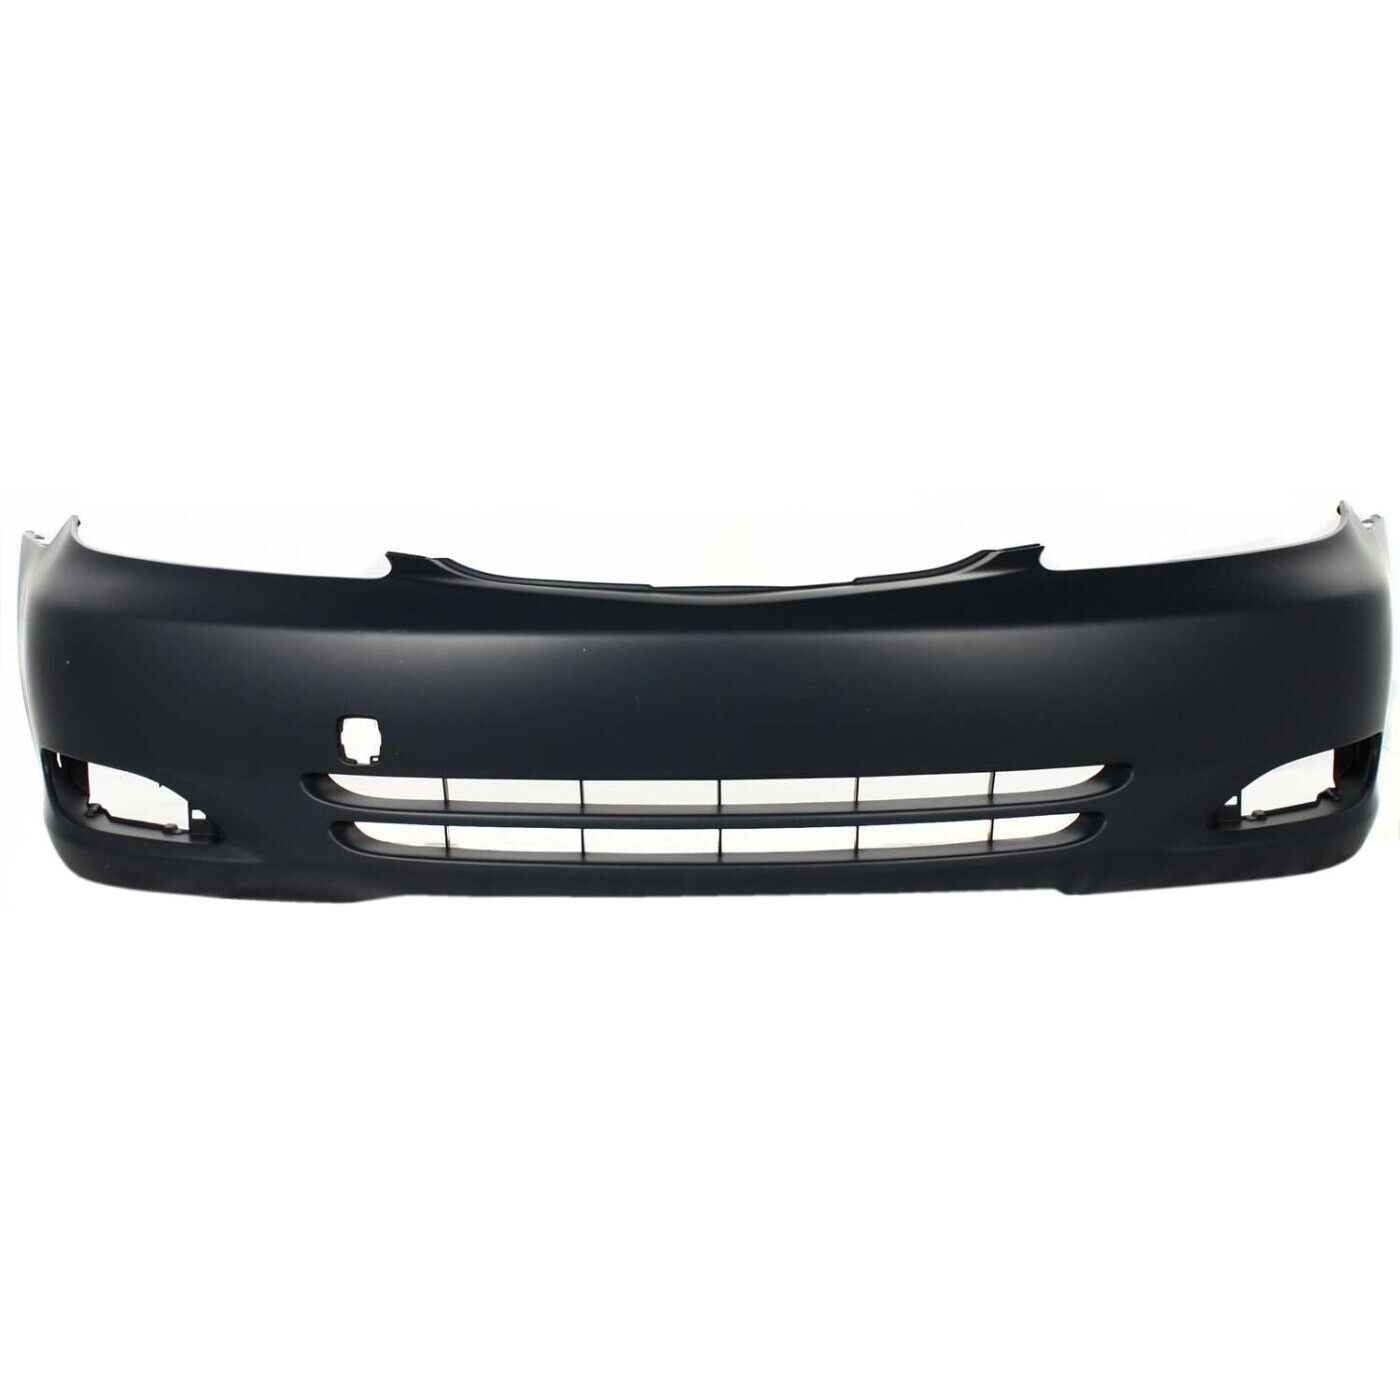 Bumper Cover For 2002-2004 Toyota Camry Front Japan Built with Fog Light Hole